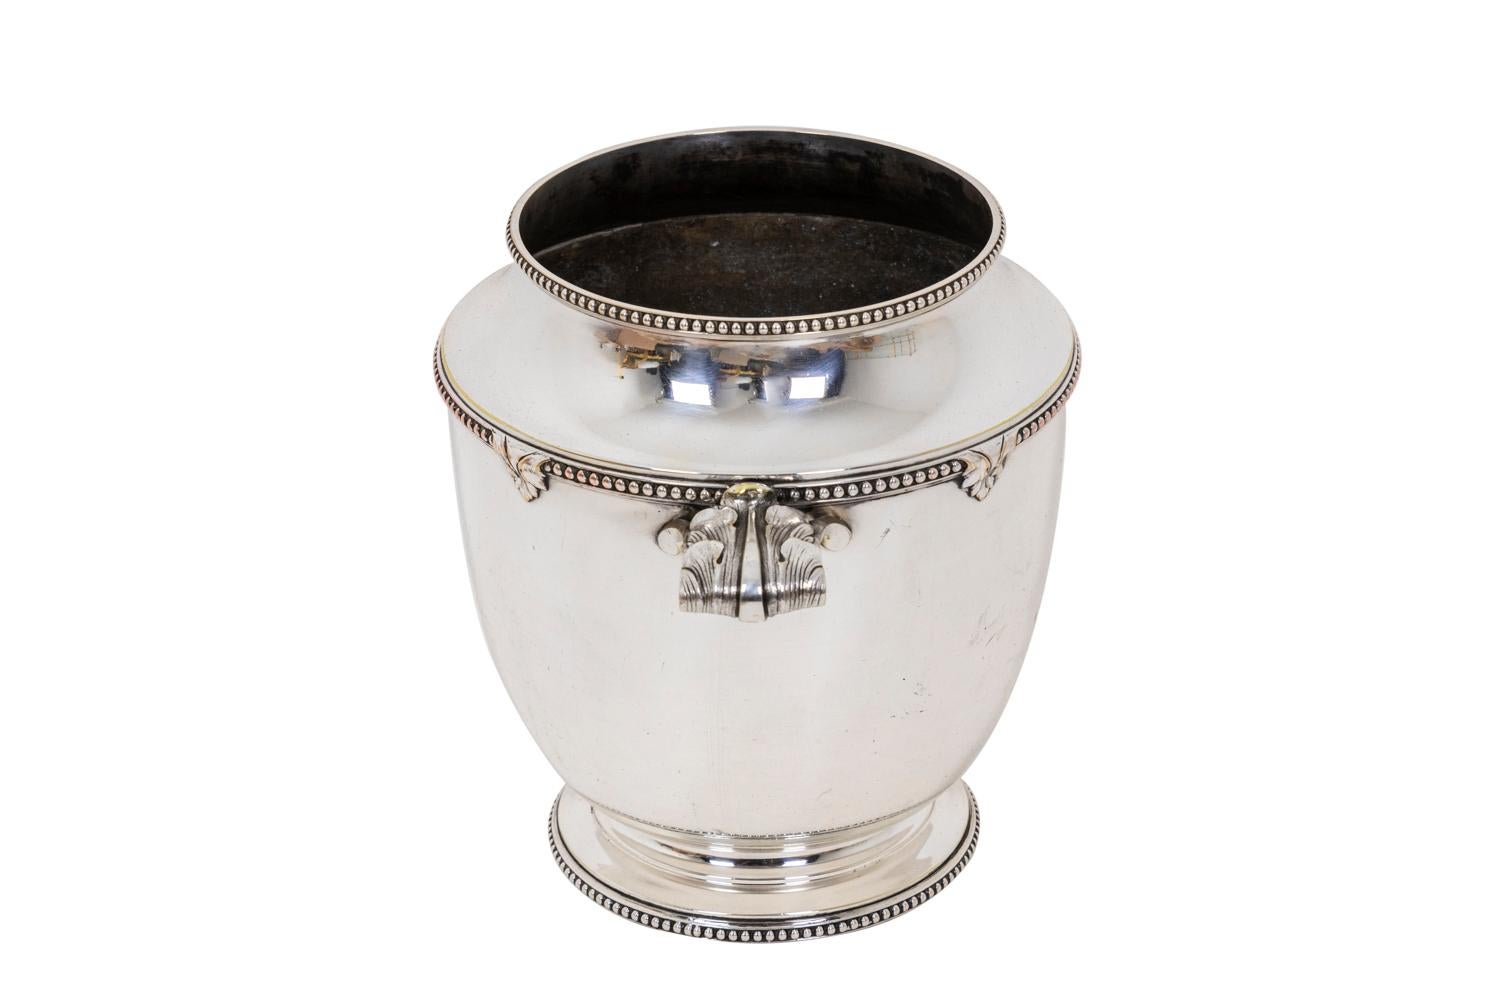 Metal Bouillet Bourdelle, Silver Plated Wine Cooler-Champagne Bucket, 20th Century